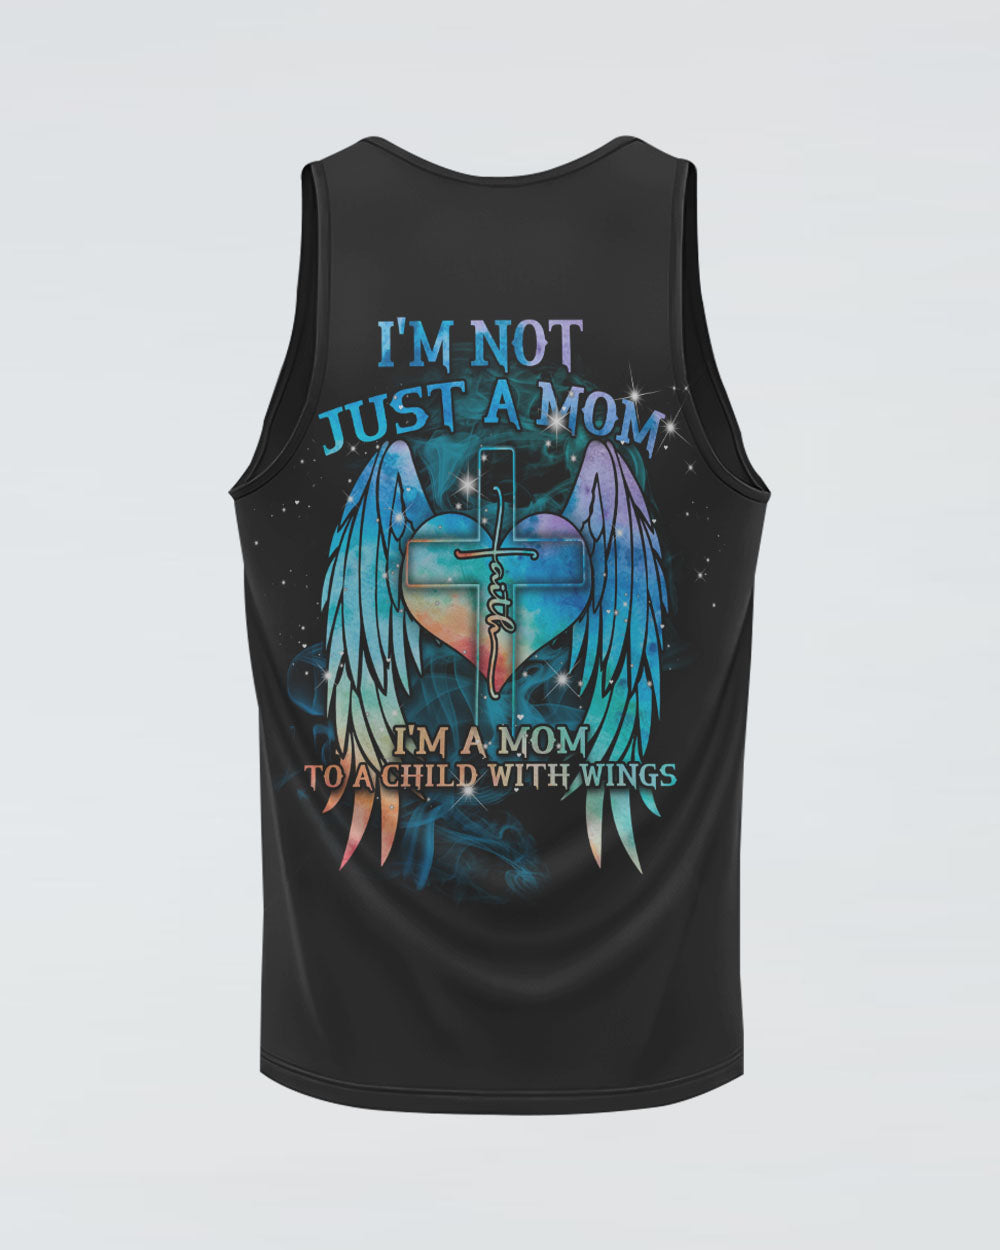 I'm Not Just A Mom Women's Christian Tanks